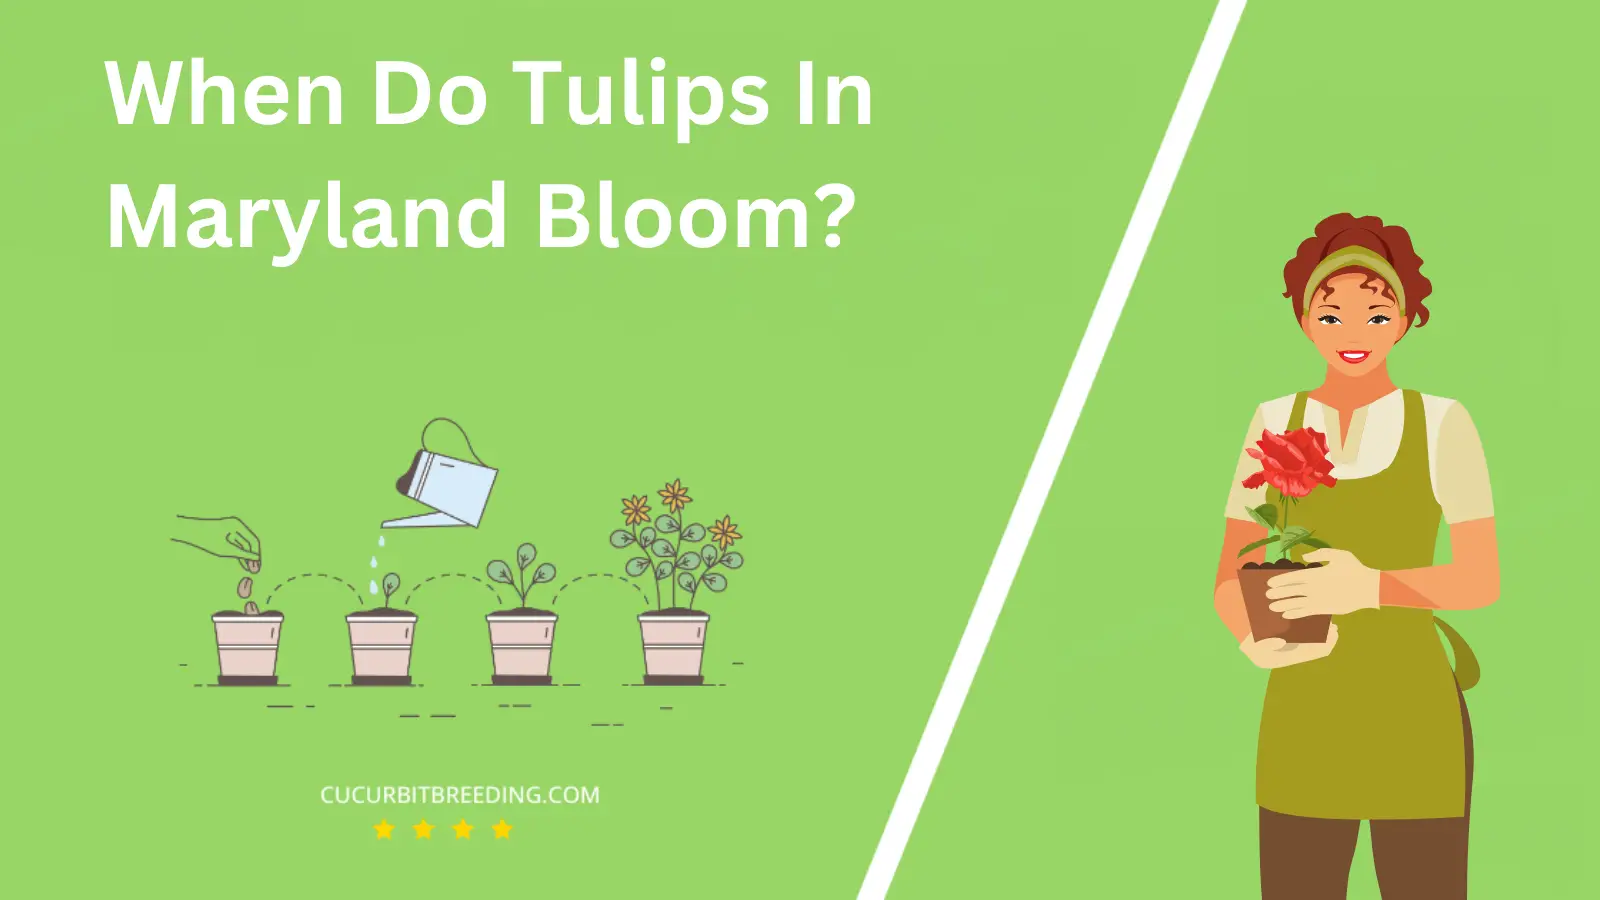 When Do Tulips In Maryland Bloom?